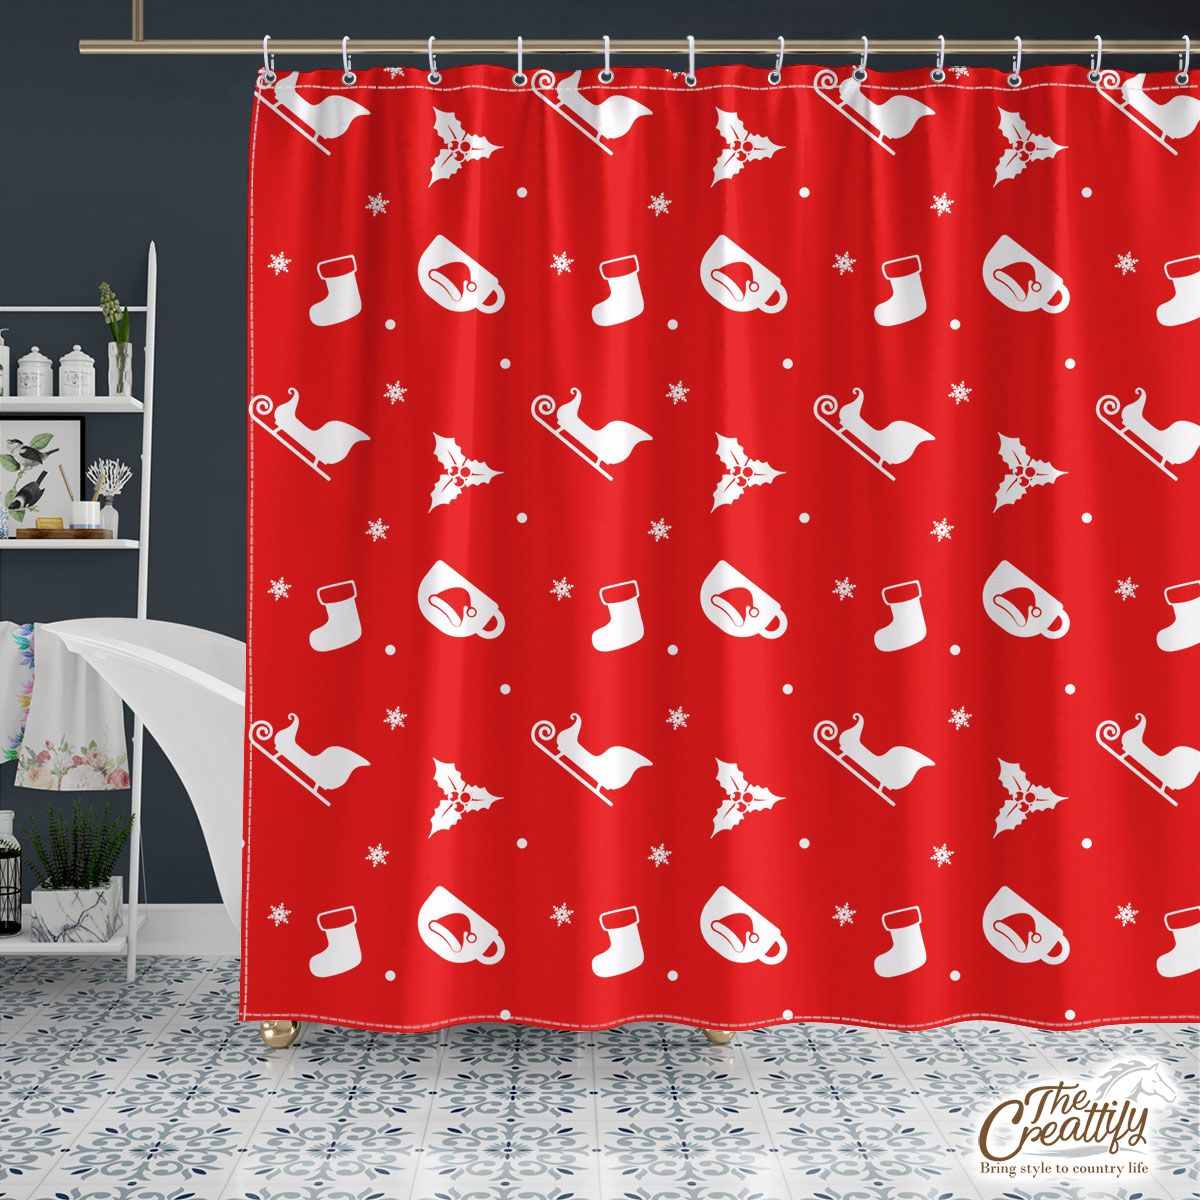 Red And White Santa Sleigh, Holly Leaf With Snowflake Shower Curtain